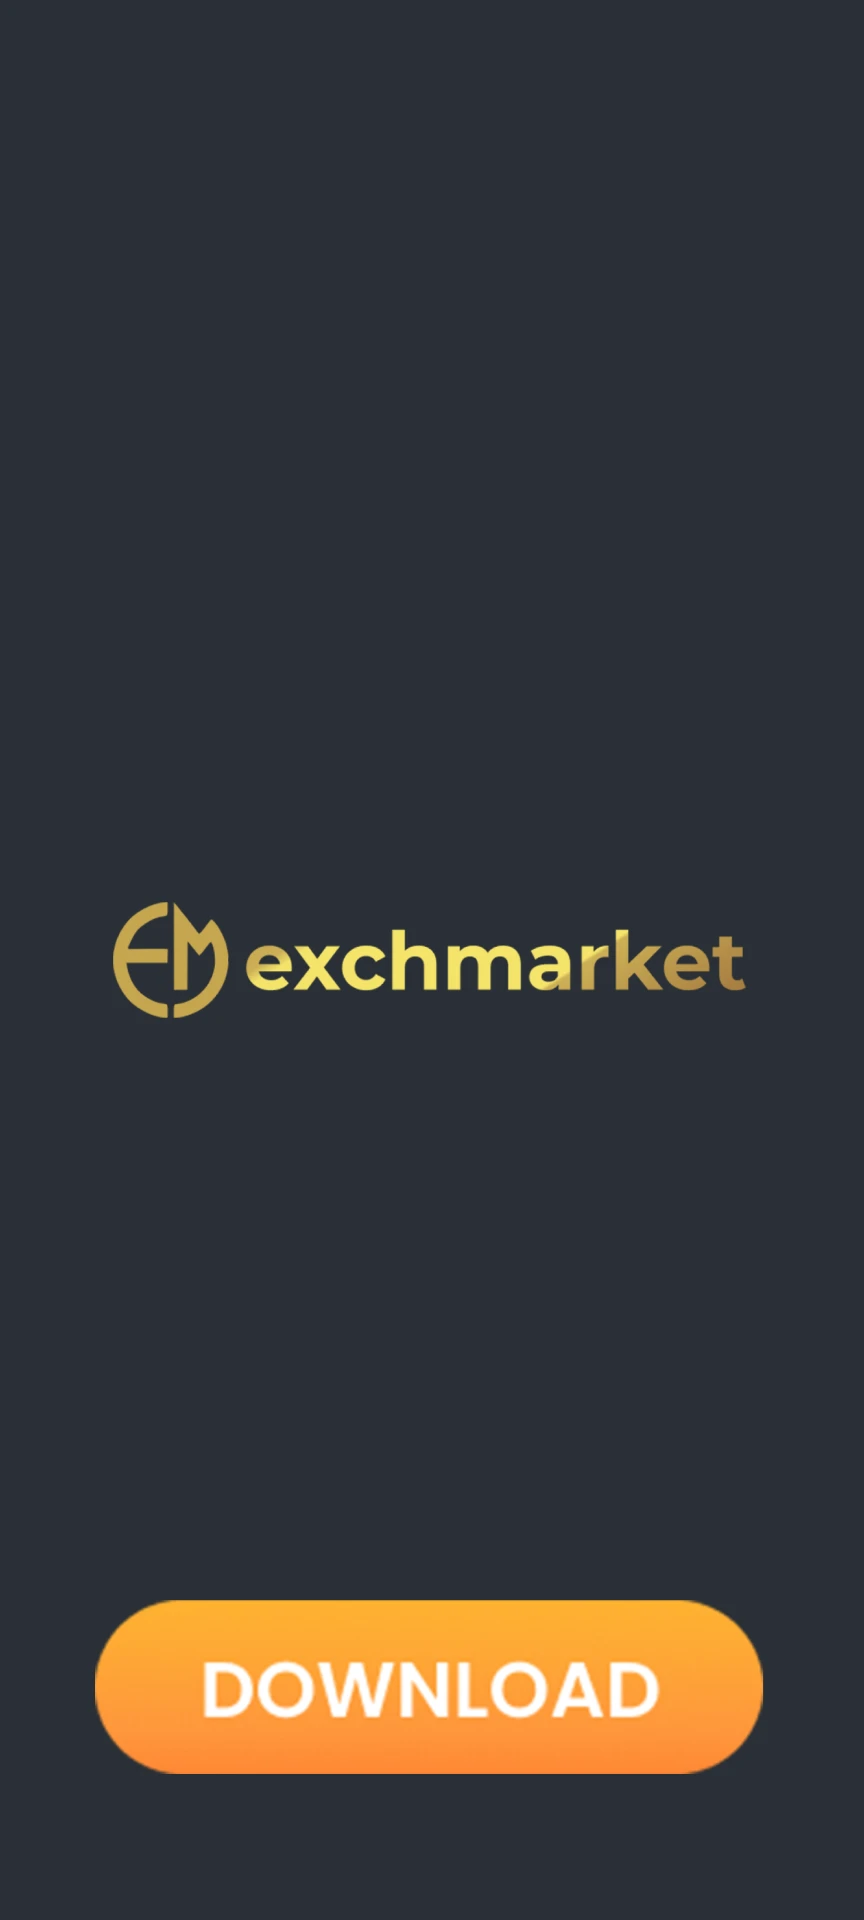 Download the Exchmarket app for Android.